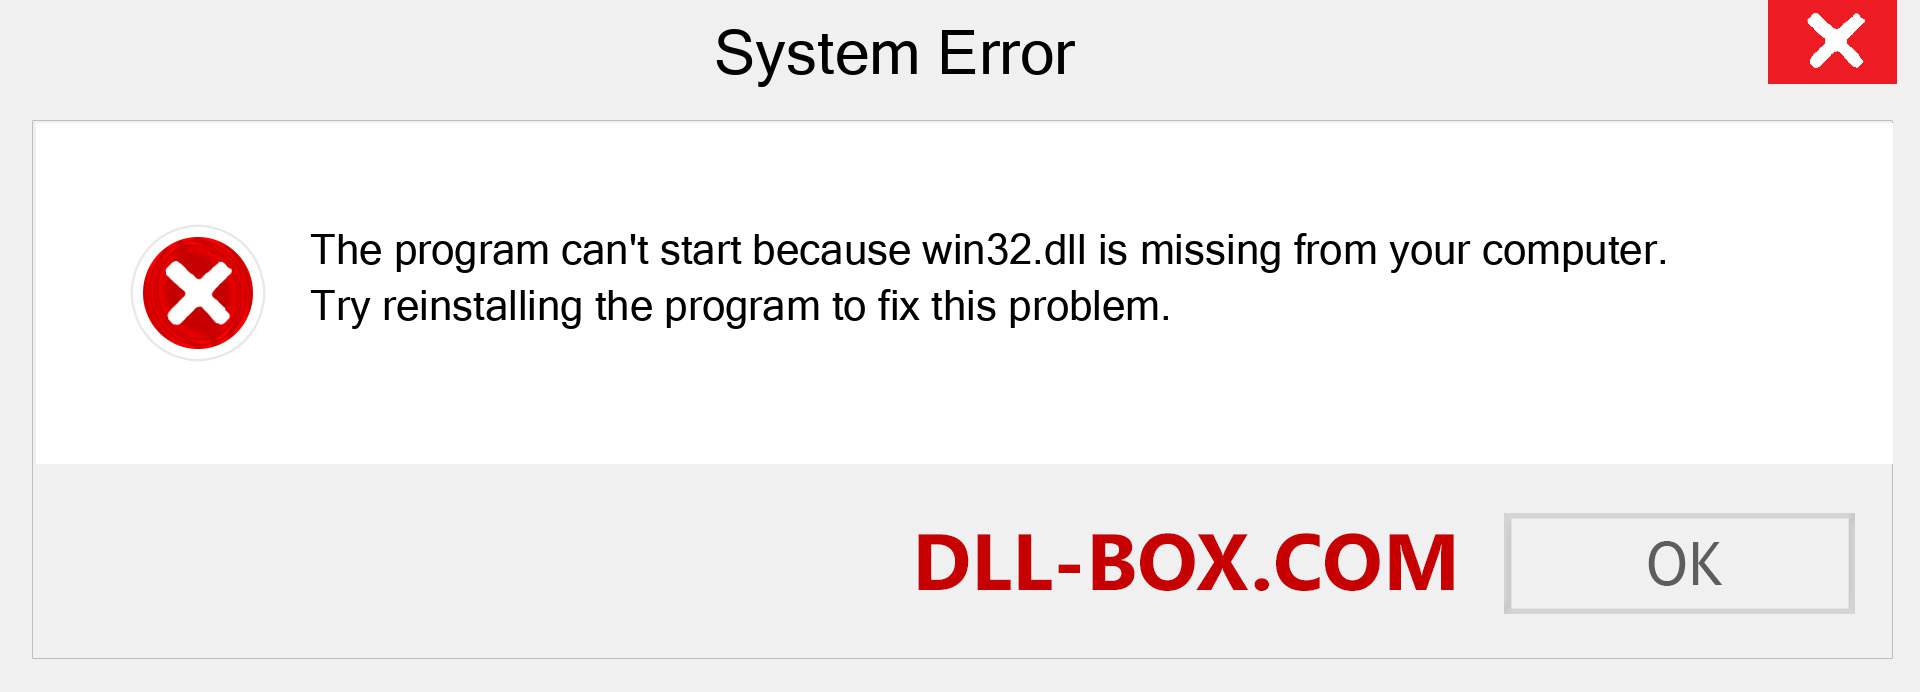  win32.dll file is missing?. Download for Windows 7, 8, 10 - Fix  win32 dll Missing Error on Windows, photos, images